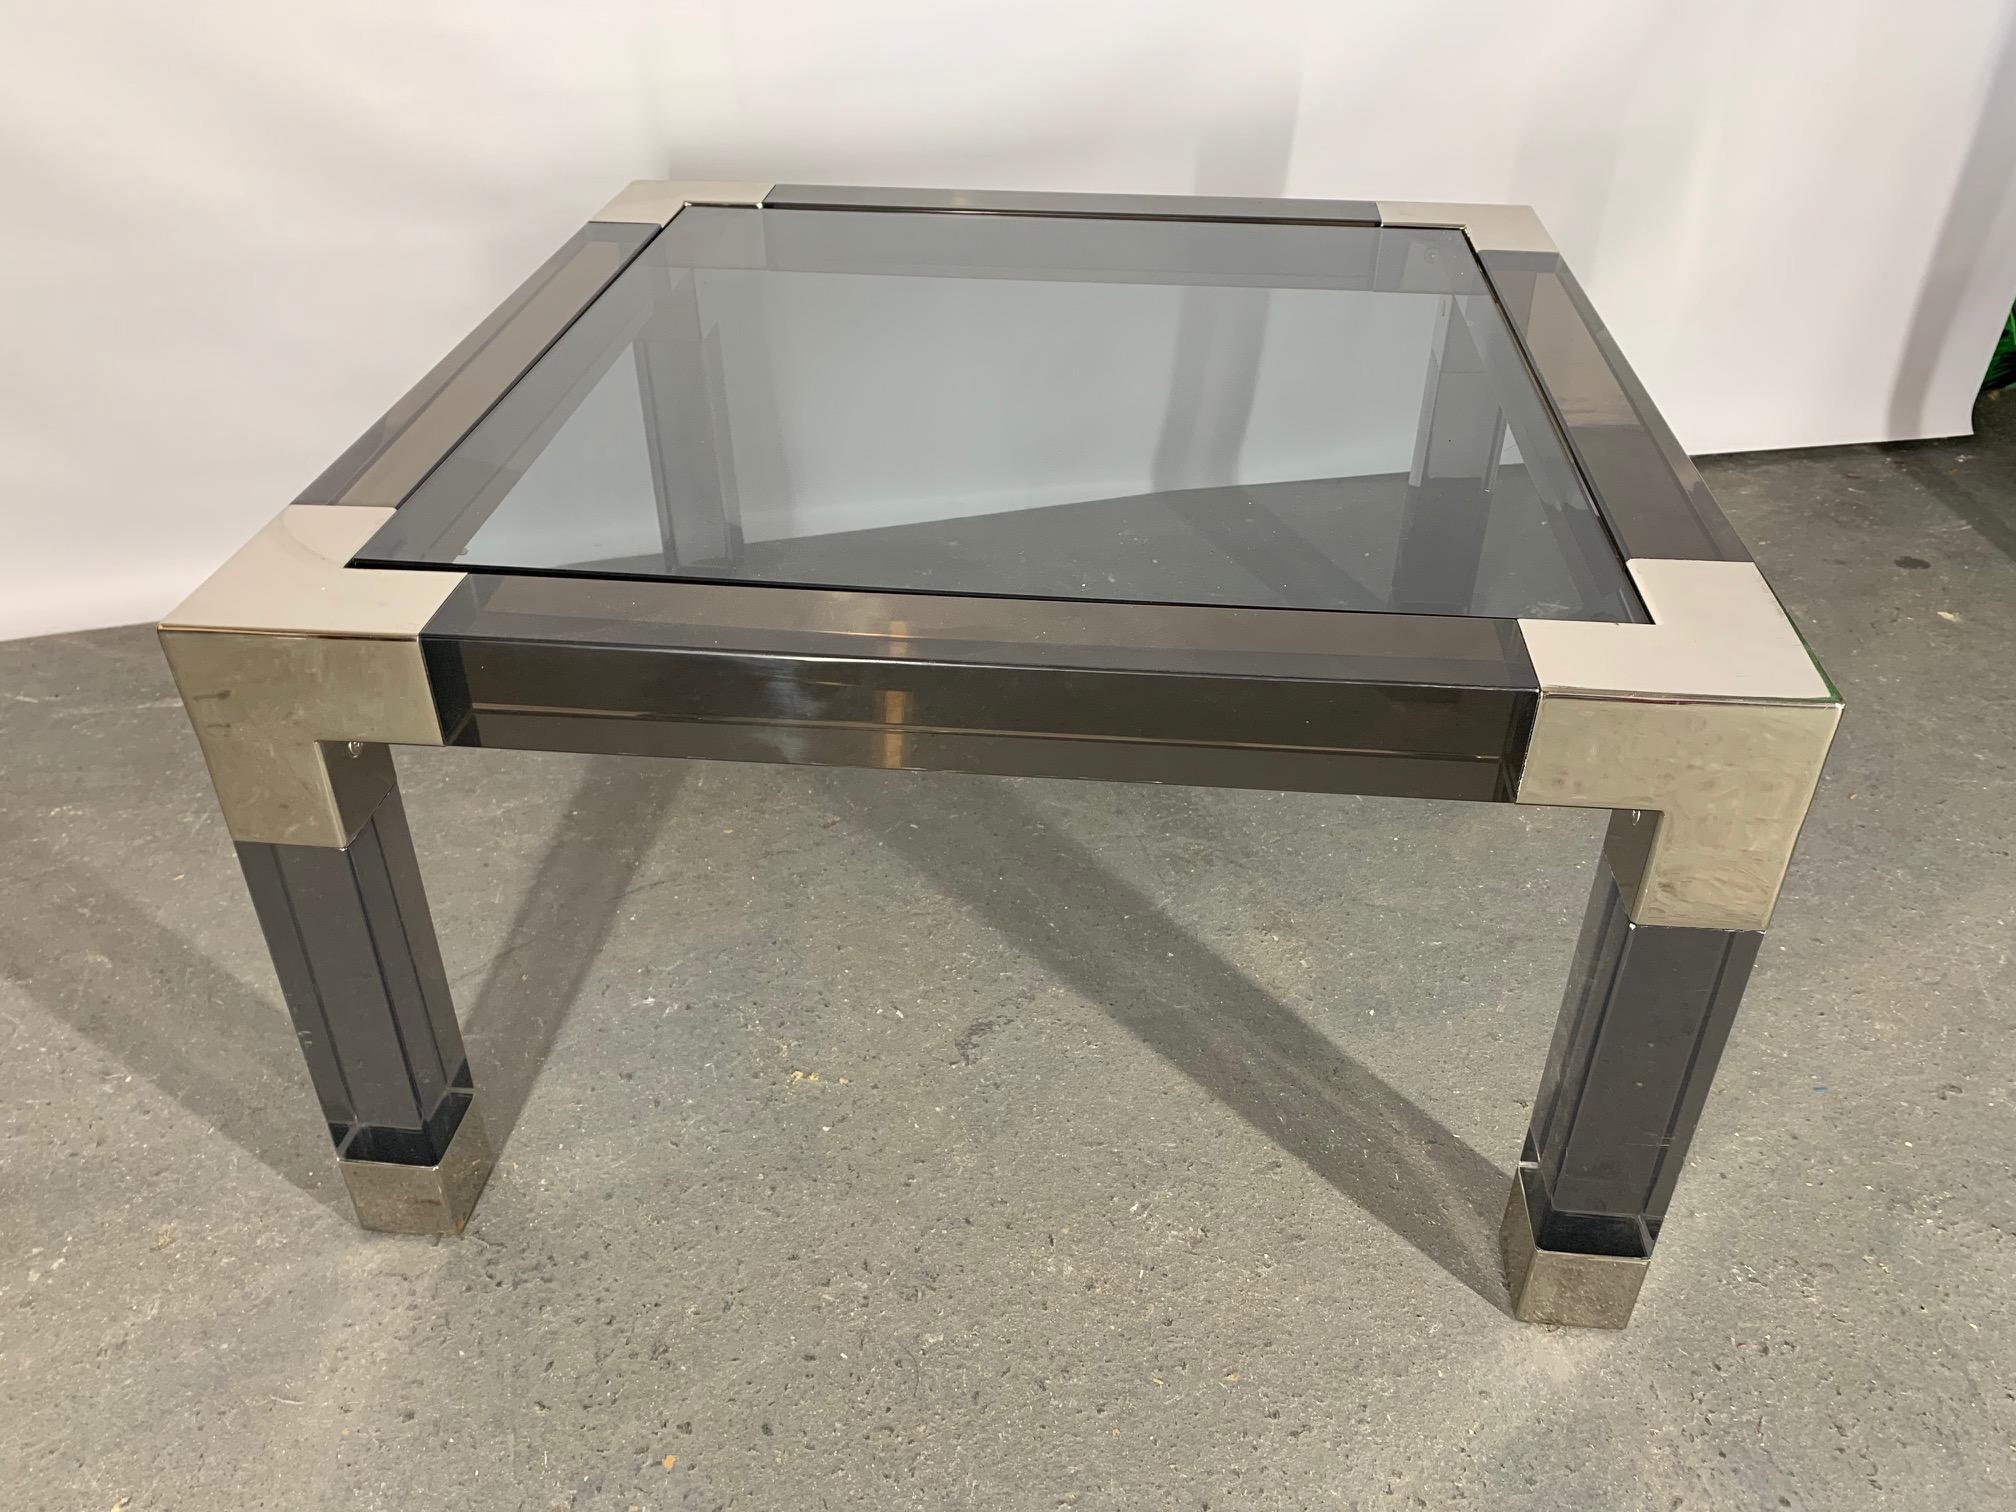 Heavy lucite table by Jonathan Adler features chrome accents and smoked glass top. Good condition with minor surface marks on chrome.
For a shipping quote to your exact zip code, please message us.
Shipping can either be arranged through Chairish or